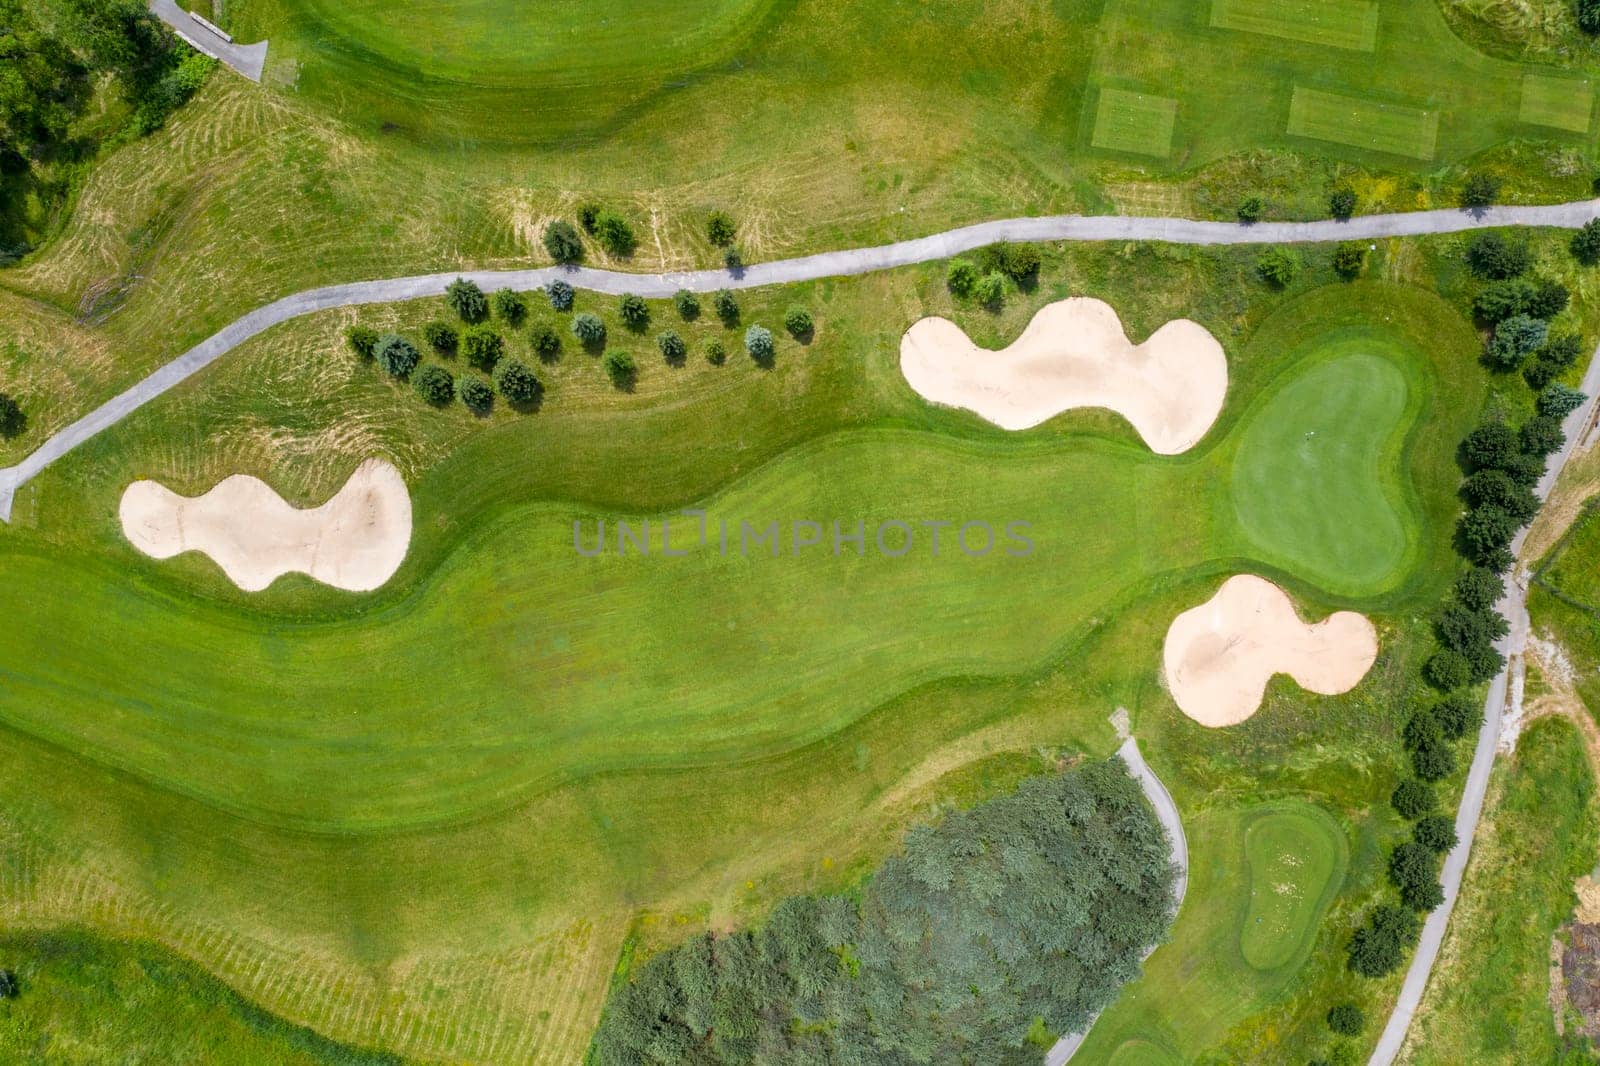 Landscape in a golf course an aerial view of a green field, lawn, and grass. Design for golfers to play games, sports, and outdoor recreation activities. by EdVal